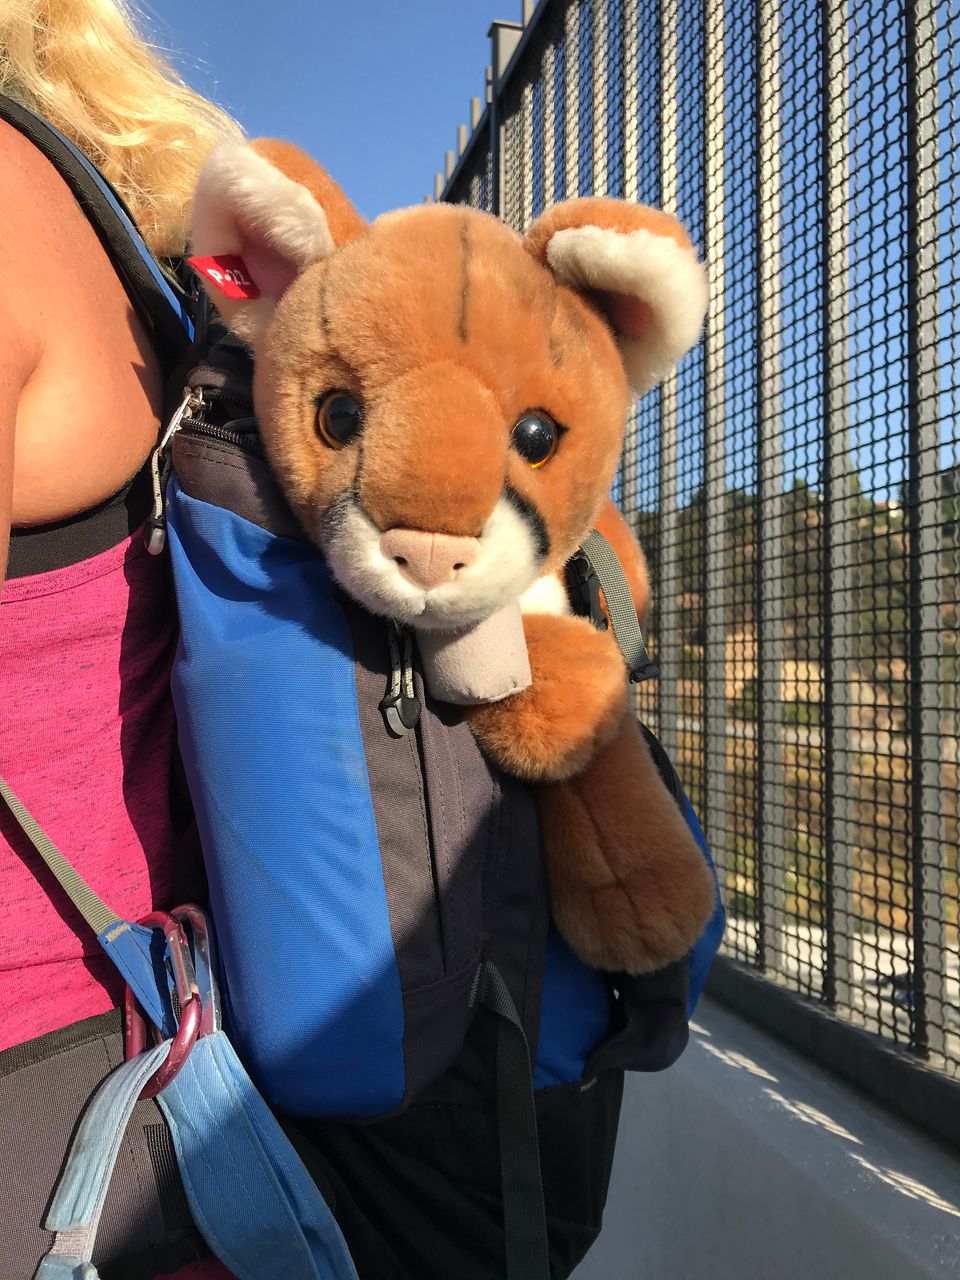 Inside Beth Pratt's backpack is a plush toy version of P-22.